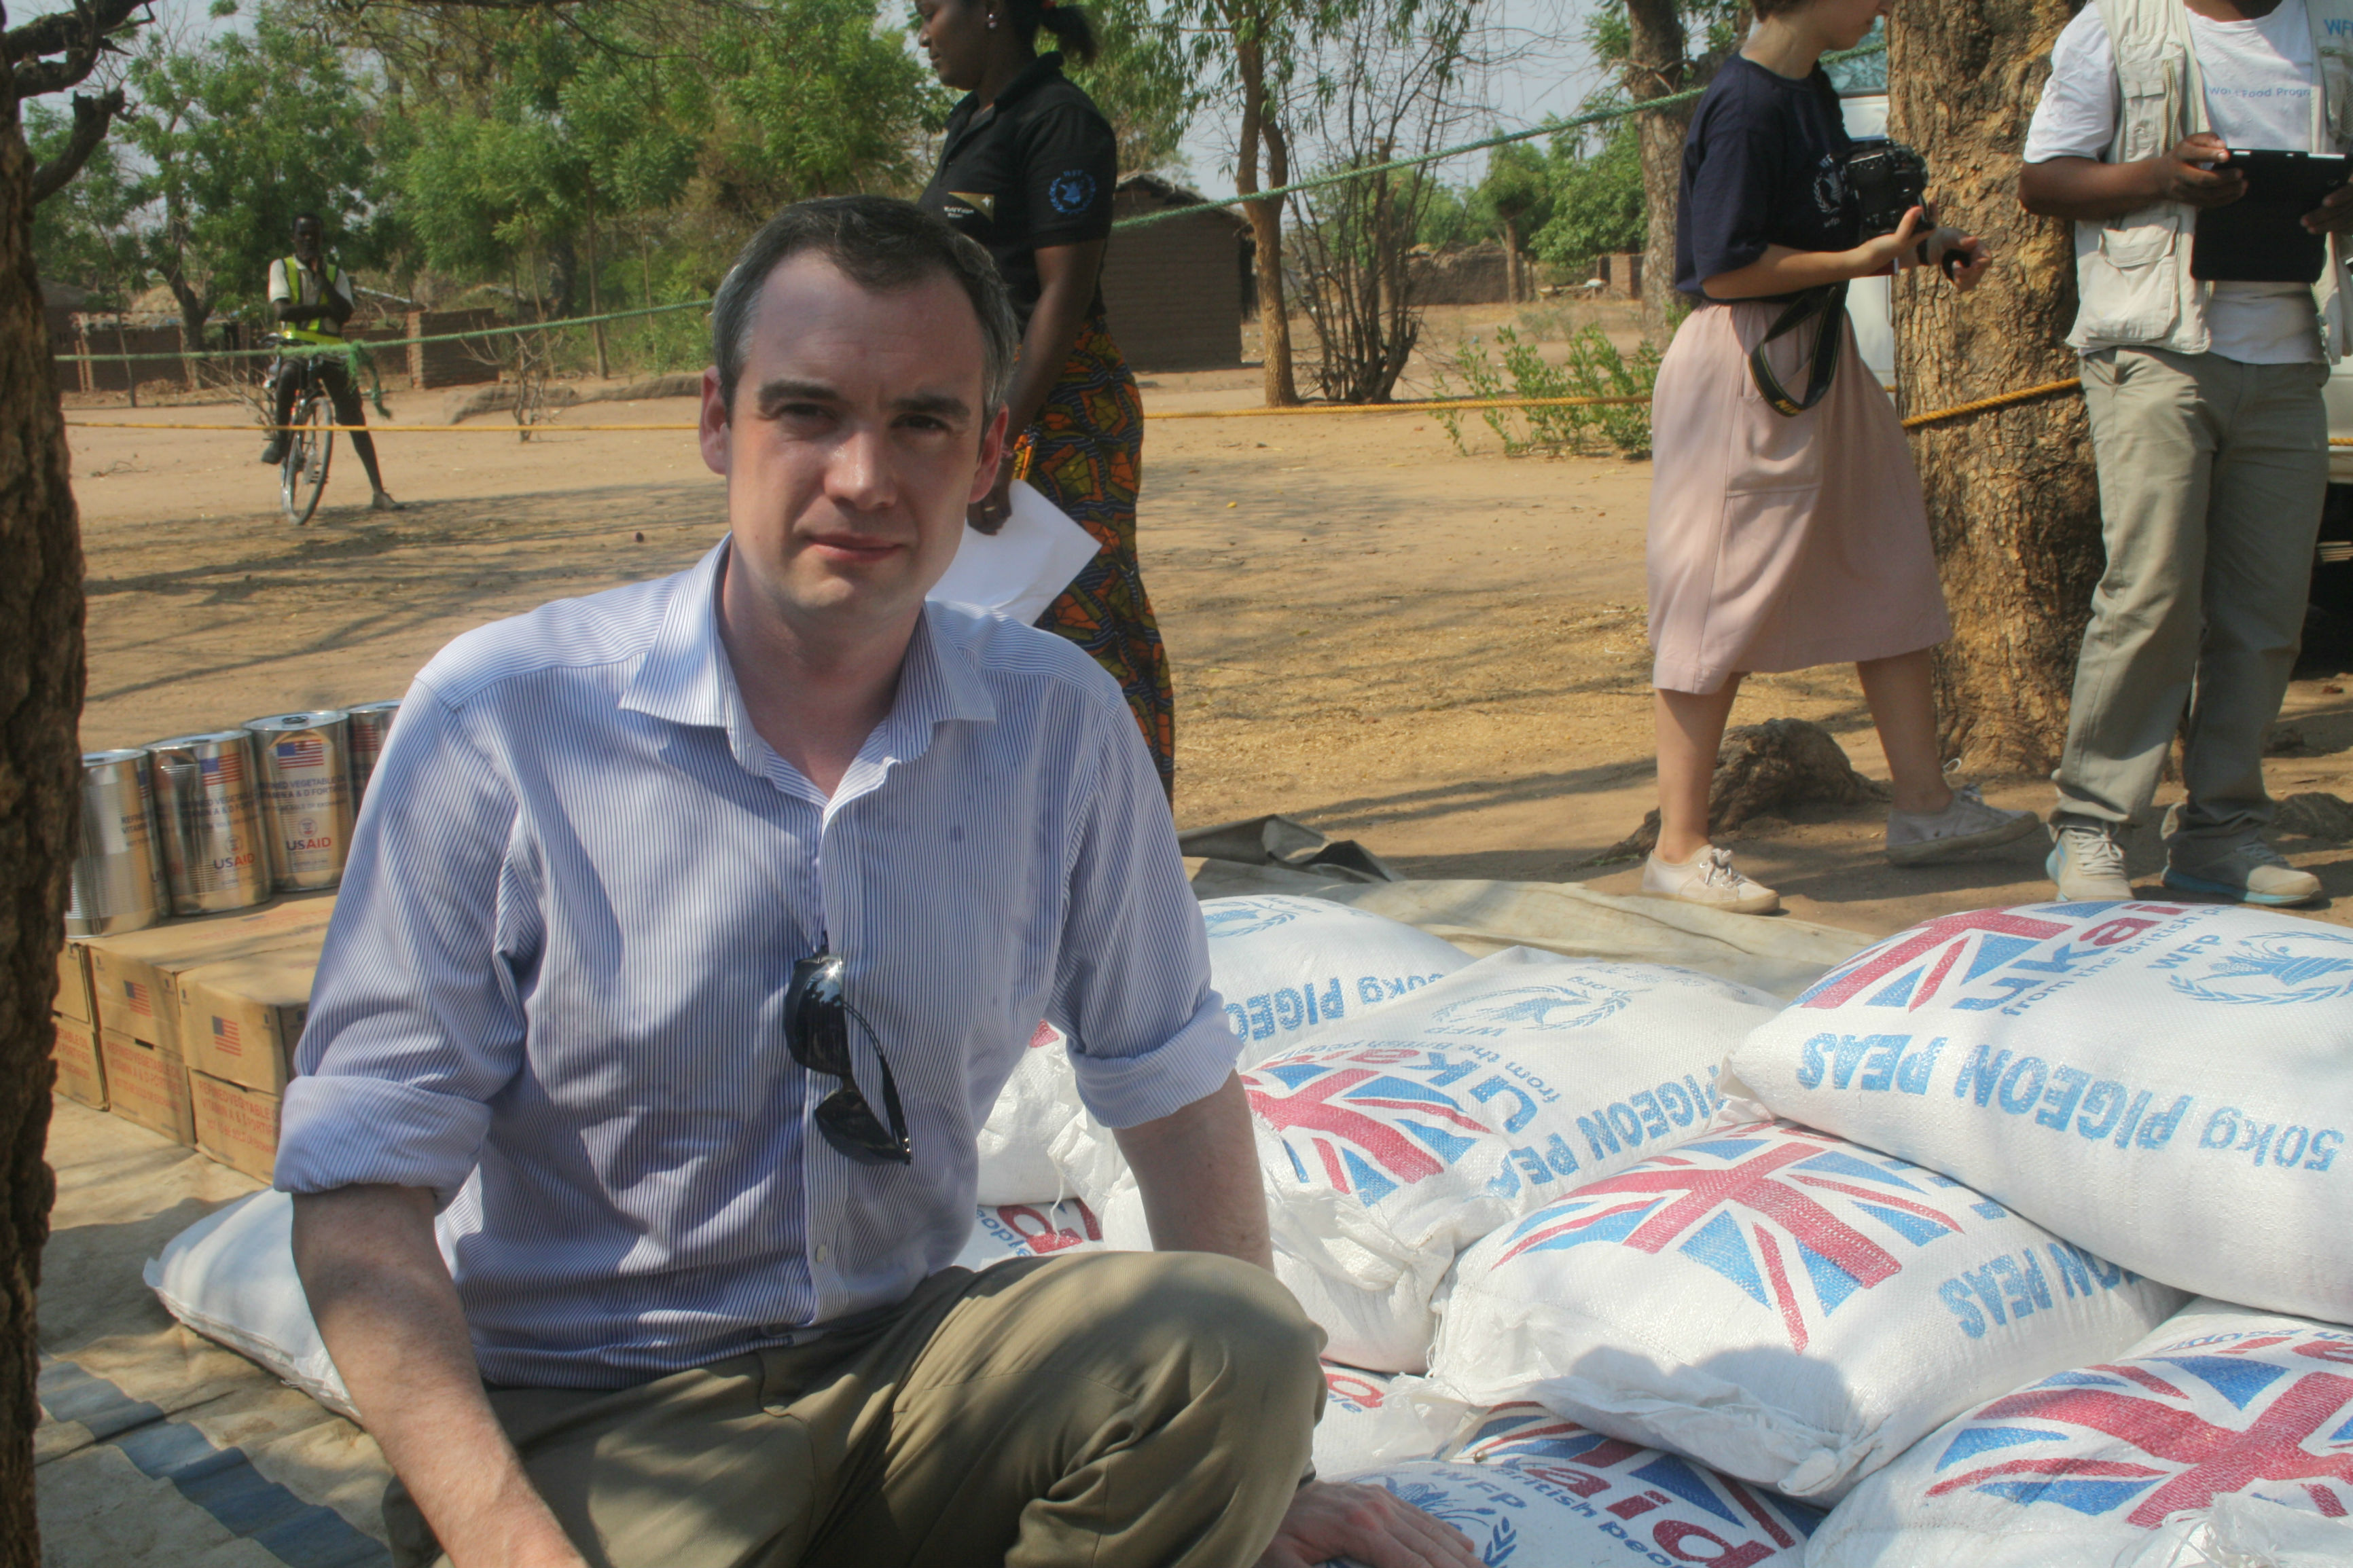 UK Government Minister James Wharton in Malawi